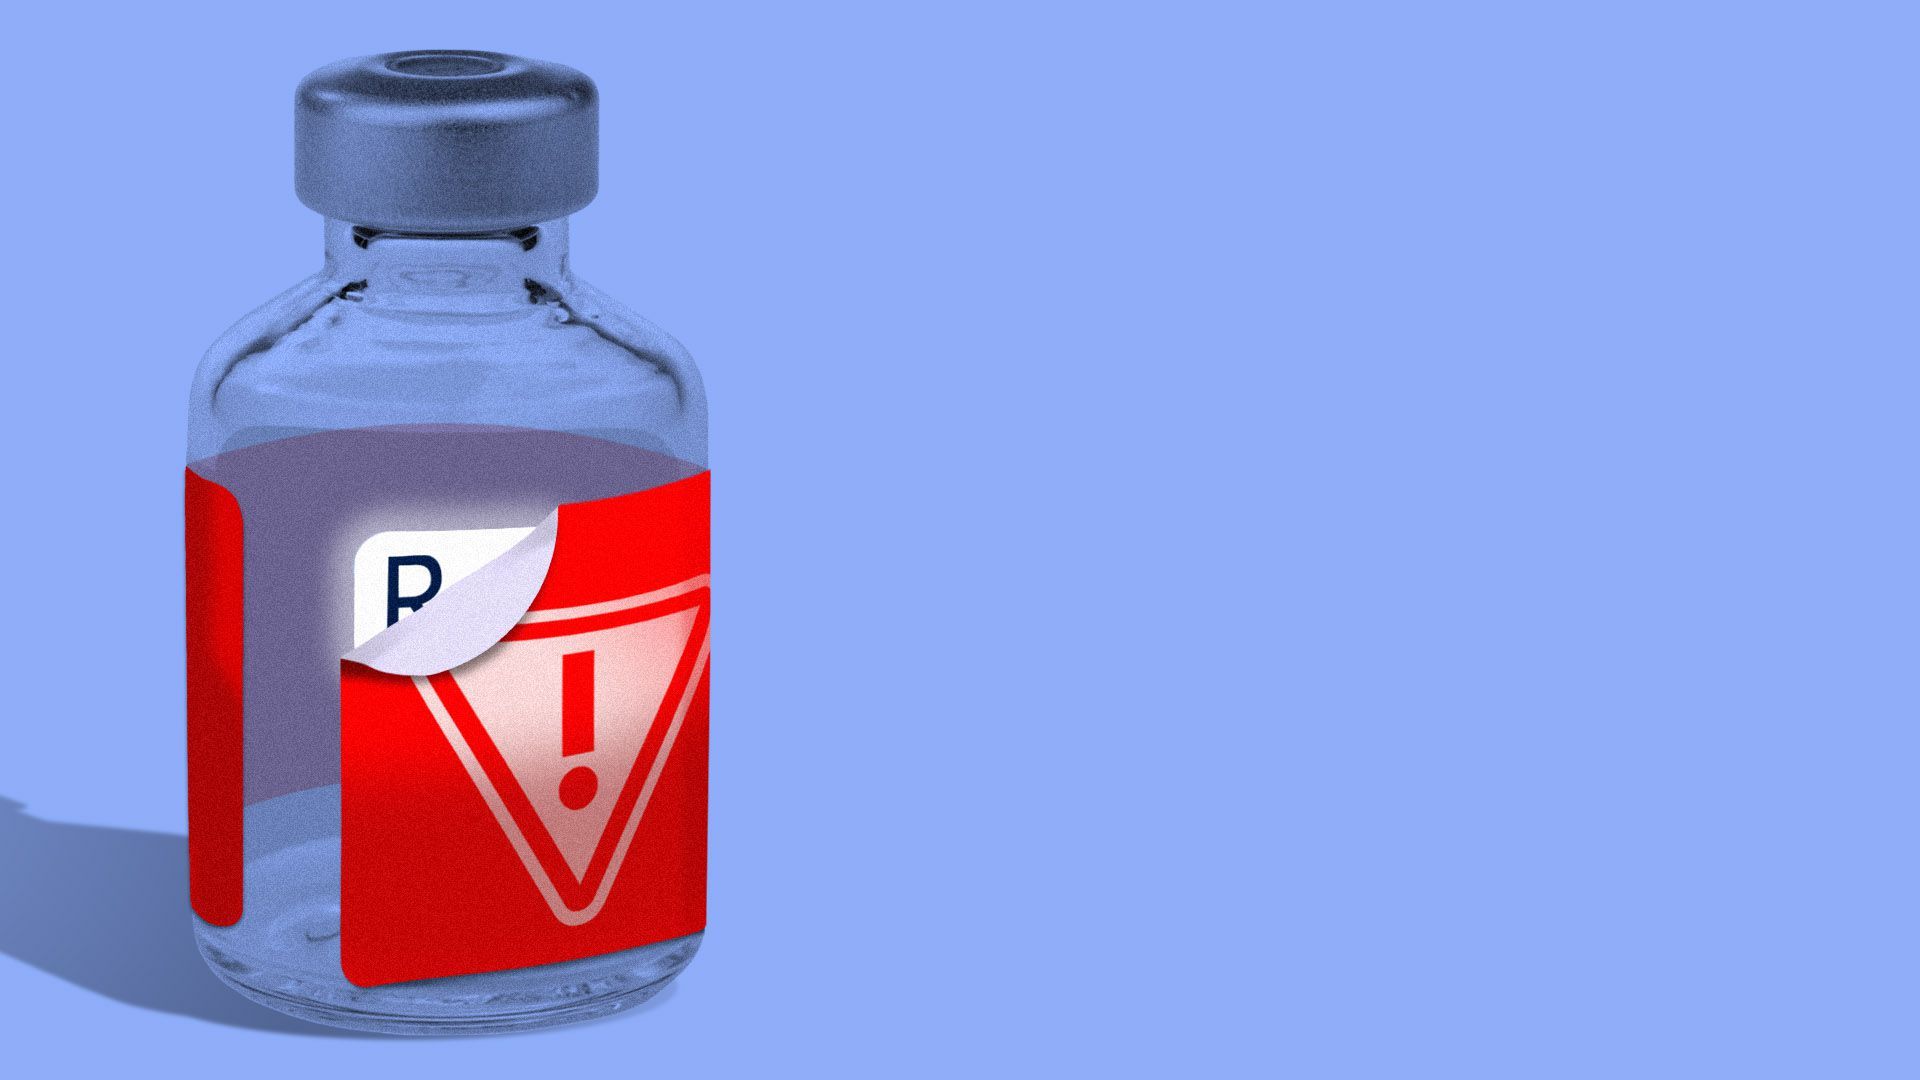 Illustration of a vaccine vile with a warning label starting to peal off